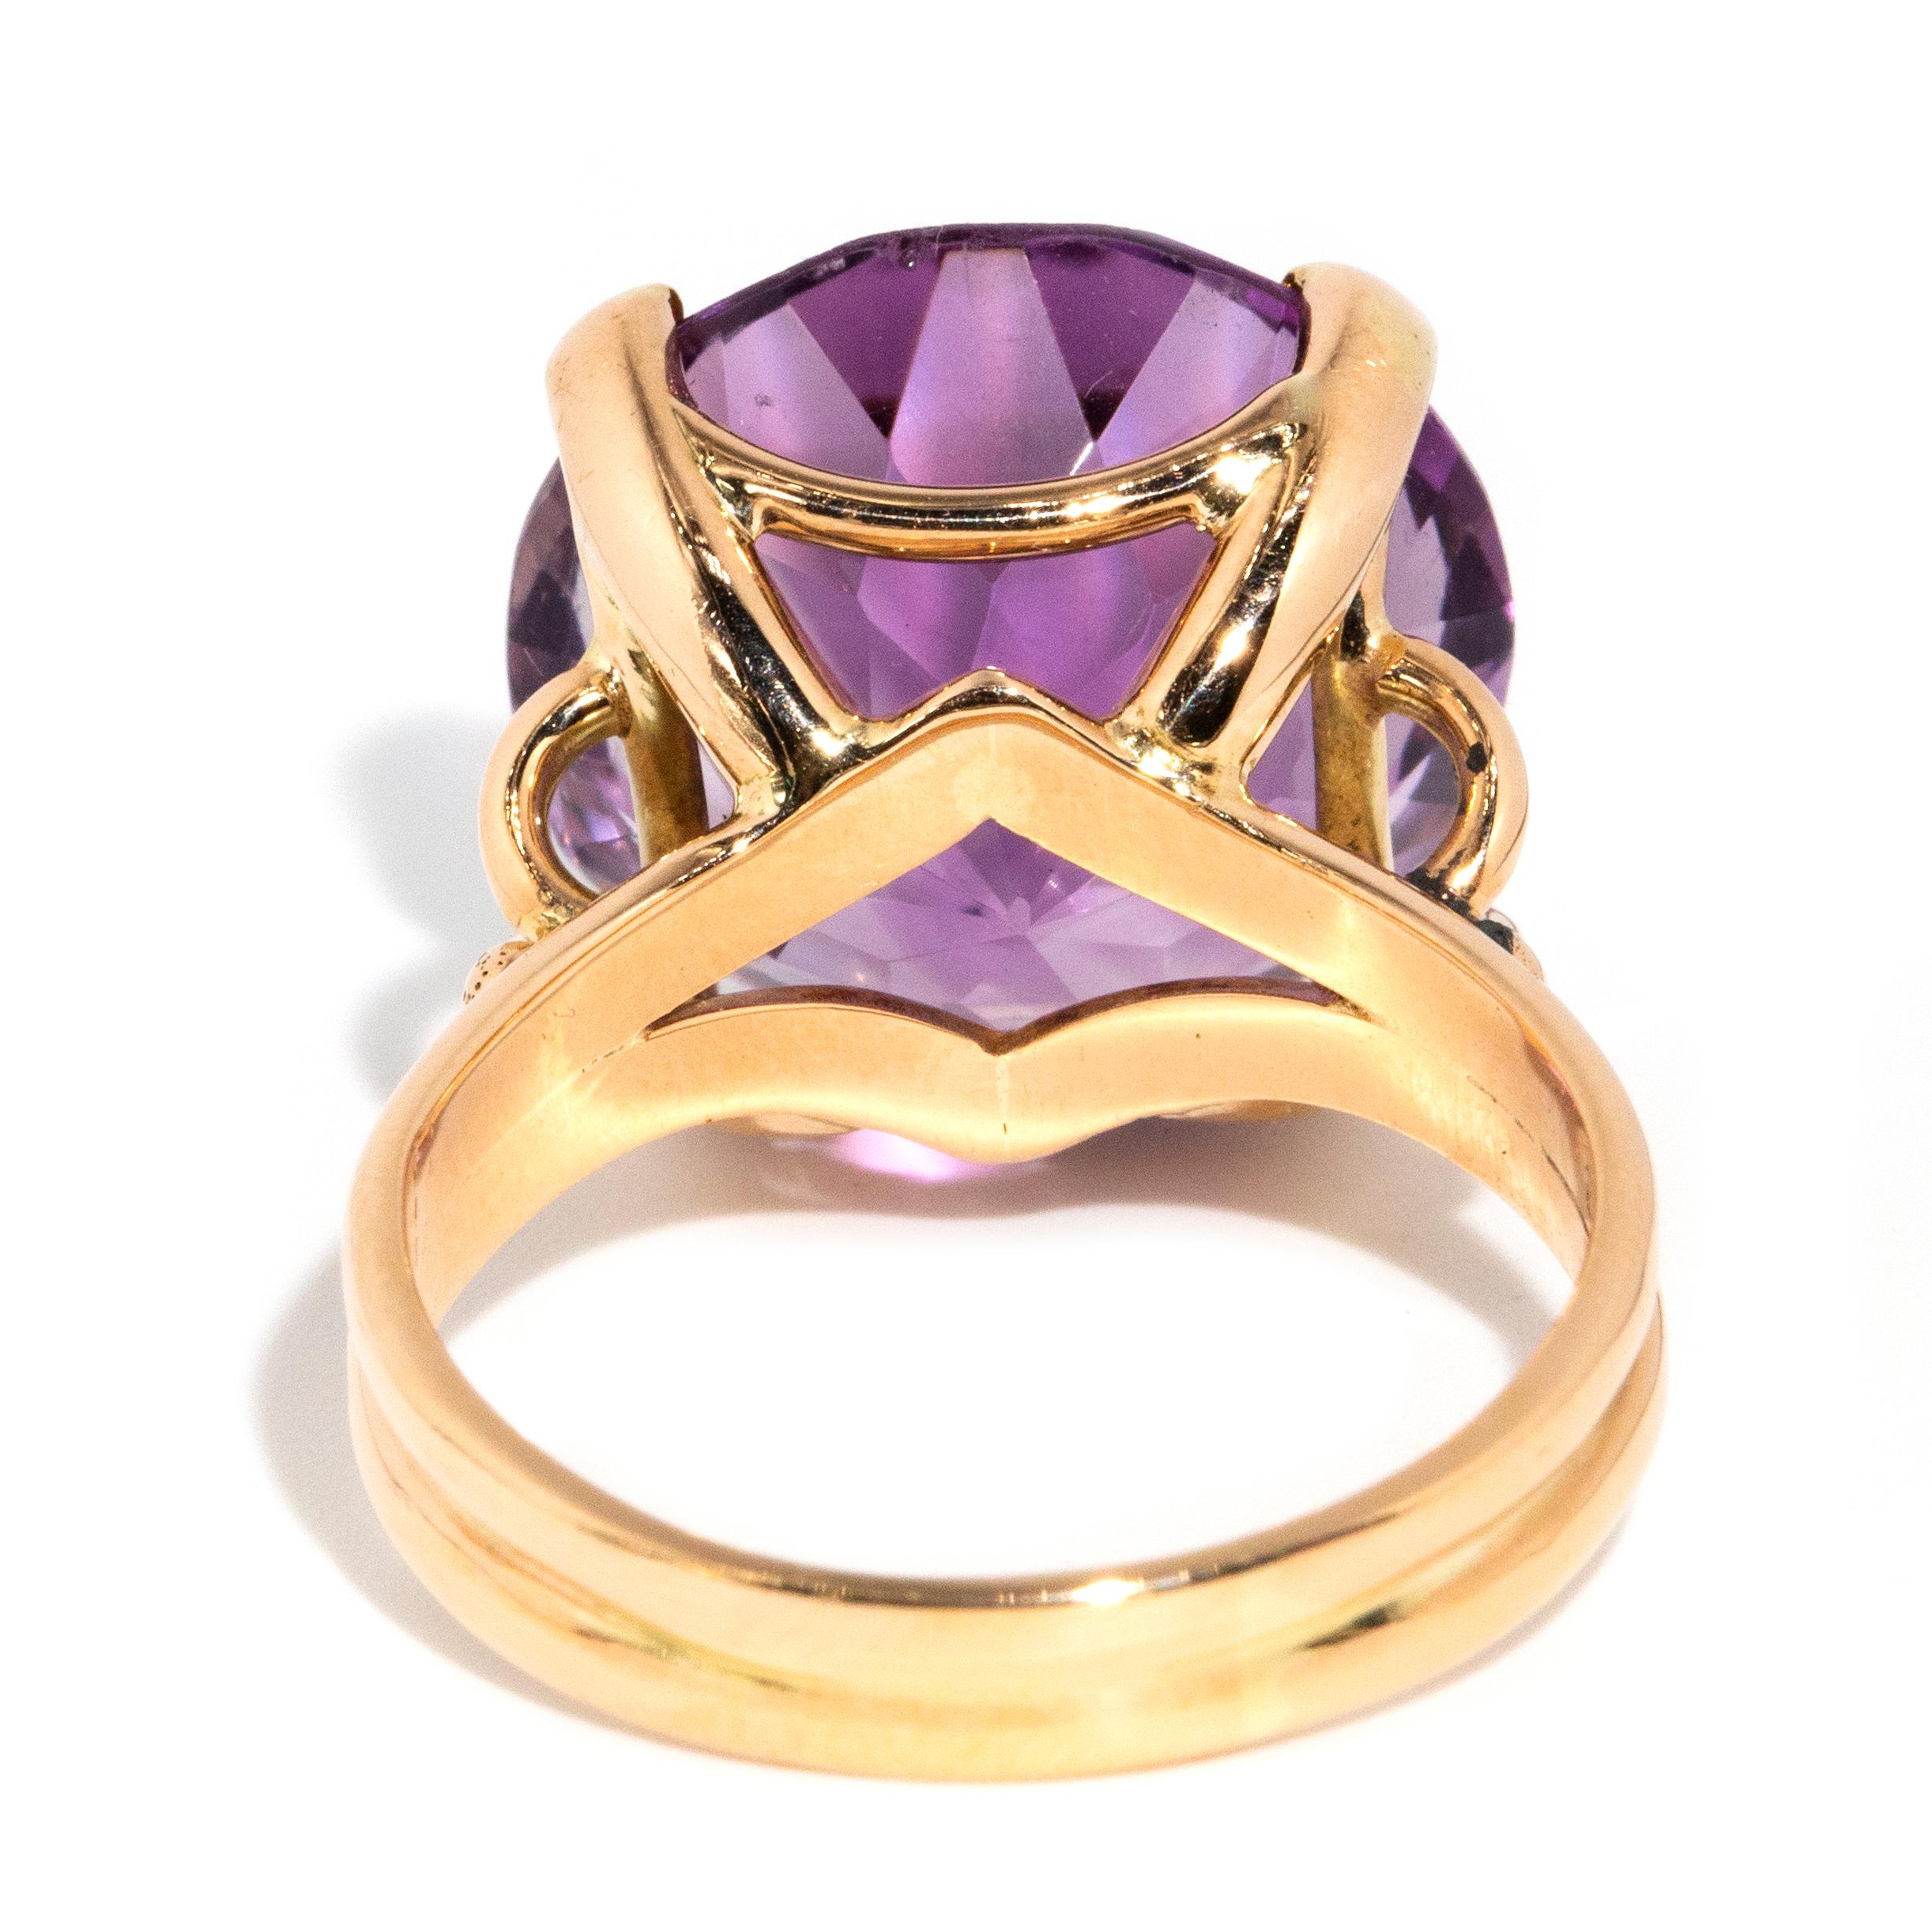 Vintage Circa 1970s Round Amethyst Solitaire Cocktail Ring 14 Carat Yellow Gold 2